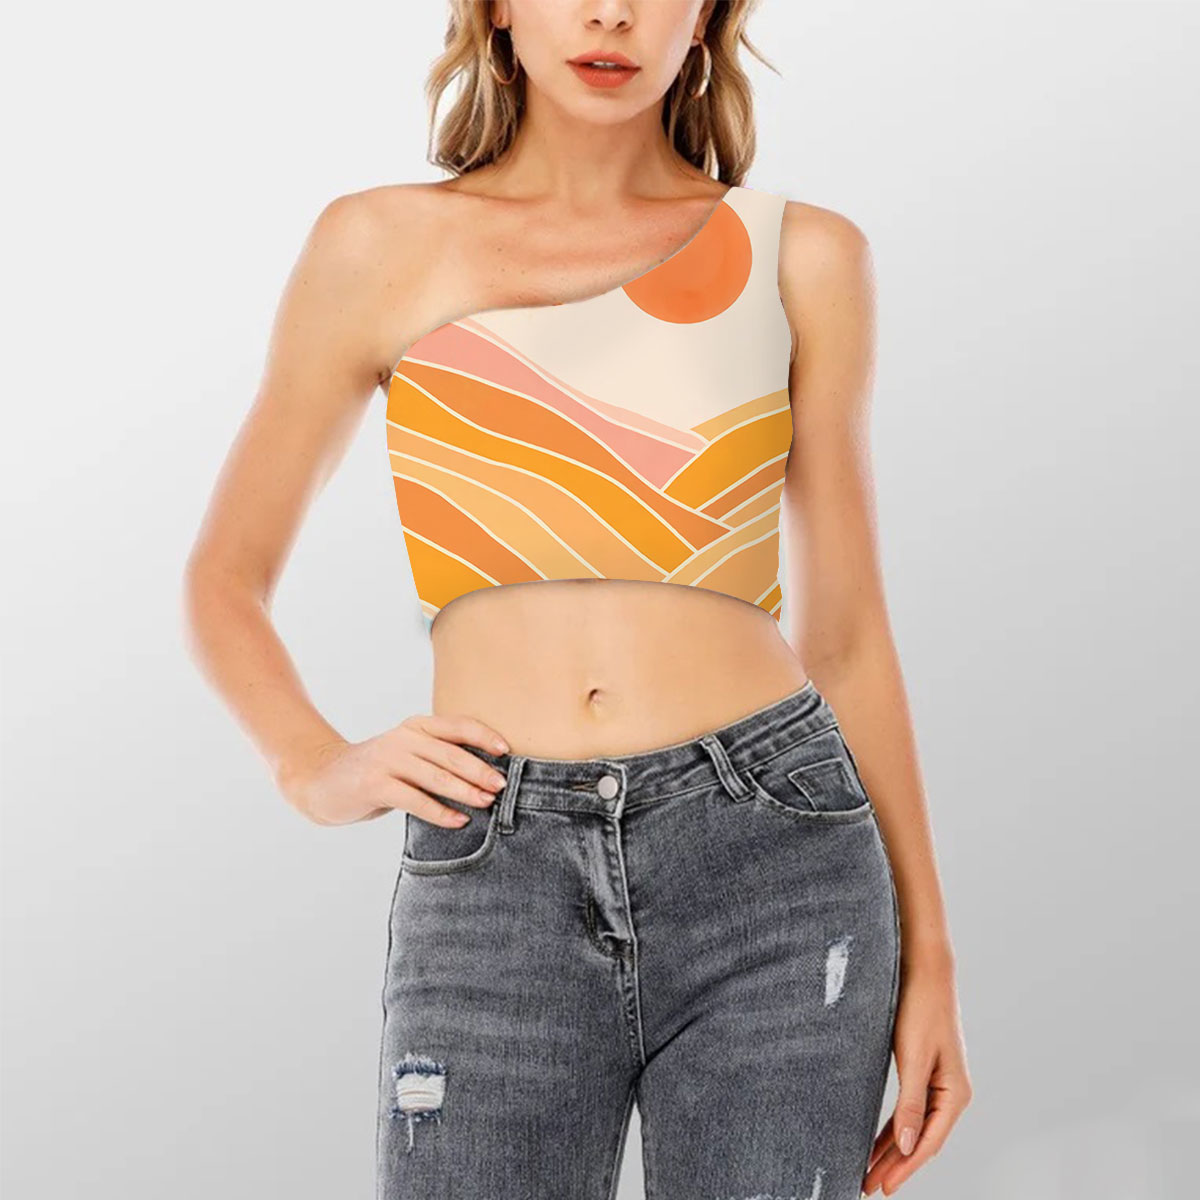 Sunrise Mountain Shoulder Cropped Top_2_1